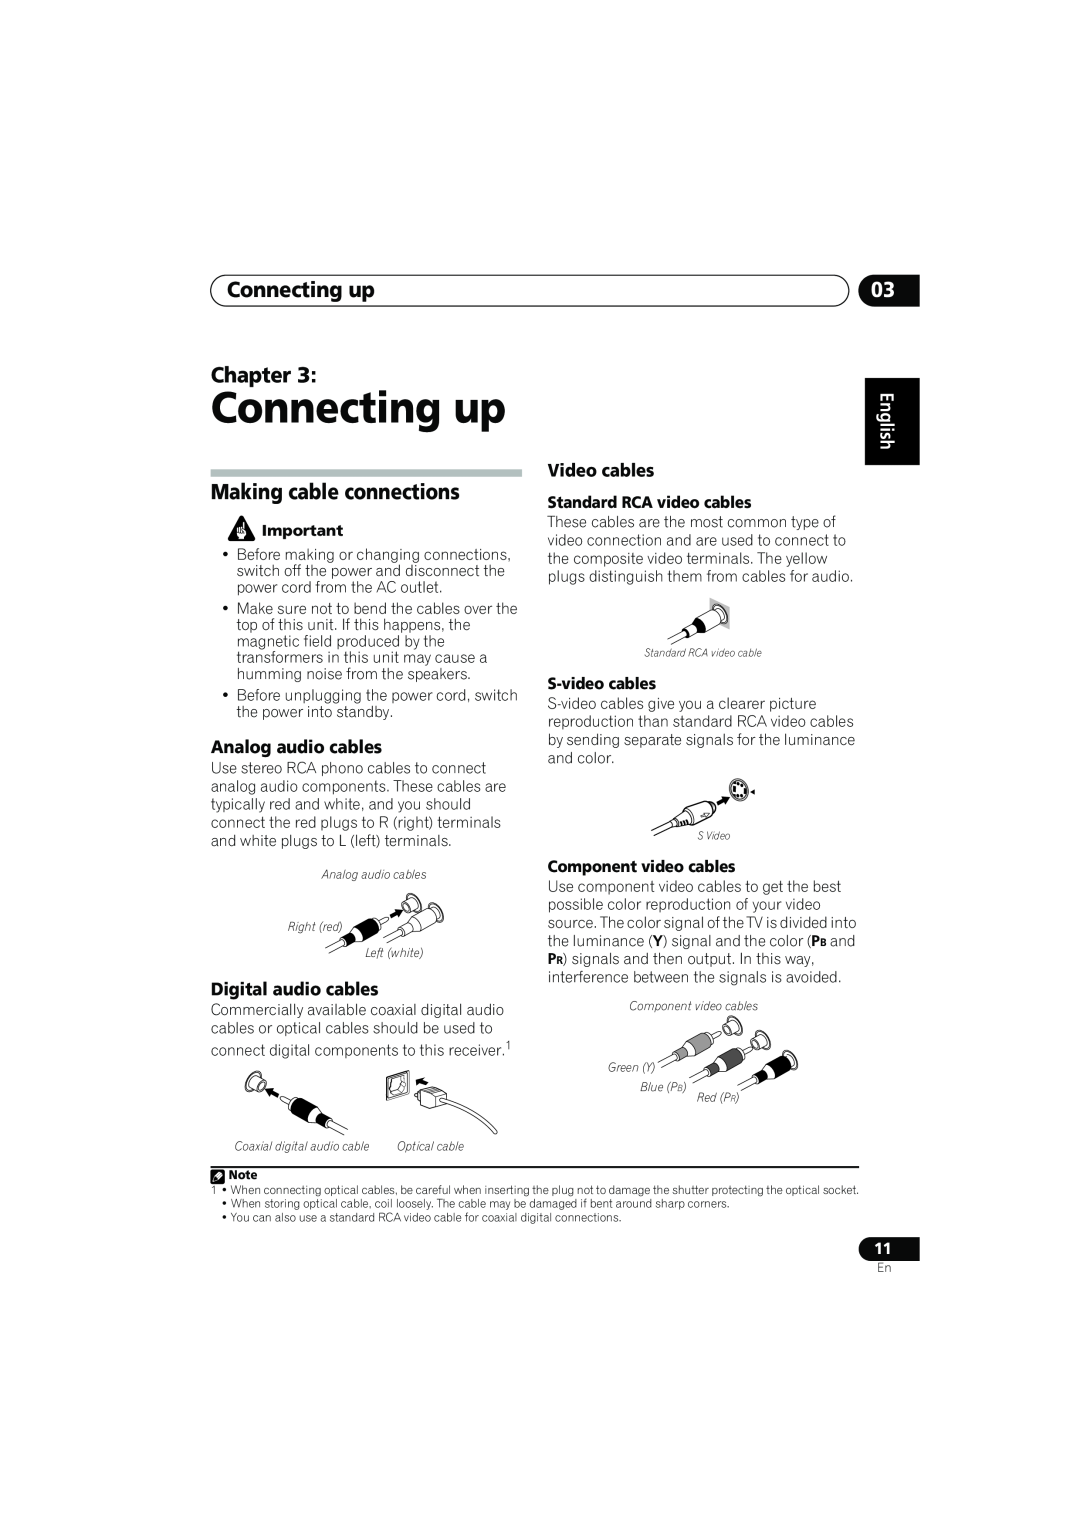 Pioneer VSX-817-S/-K Connecting up Chapter, Making cable connections, Video cables, Analog audio cables, S-videocables 